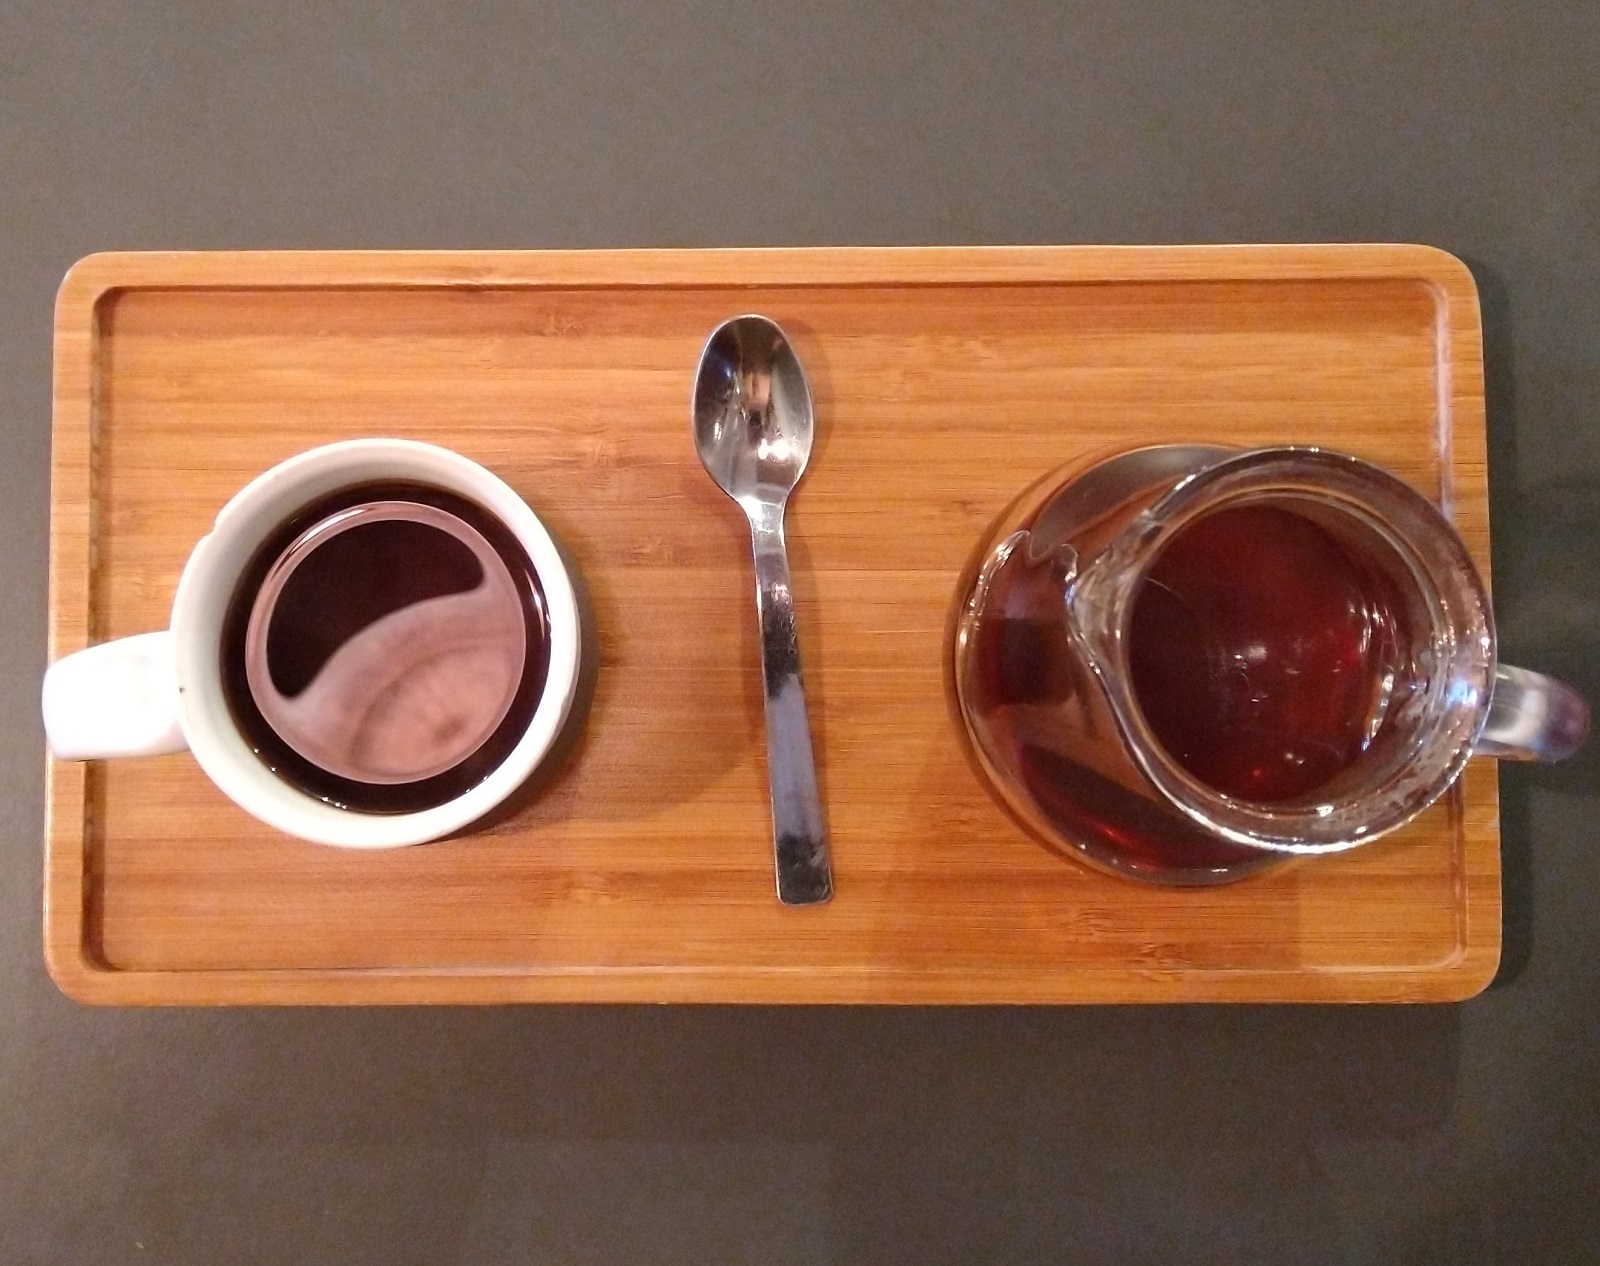 A V60 of a Gakui AA Kenyan single-origin served in a carafe, with the cup on one side, presented on a wooden tray at Coffeeangel TCD.